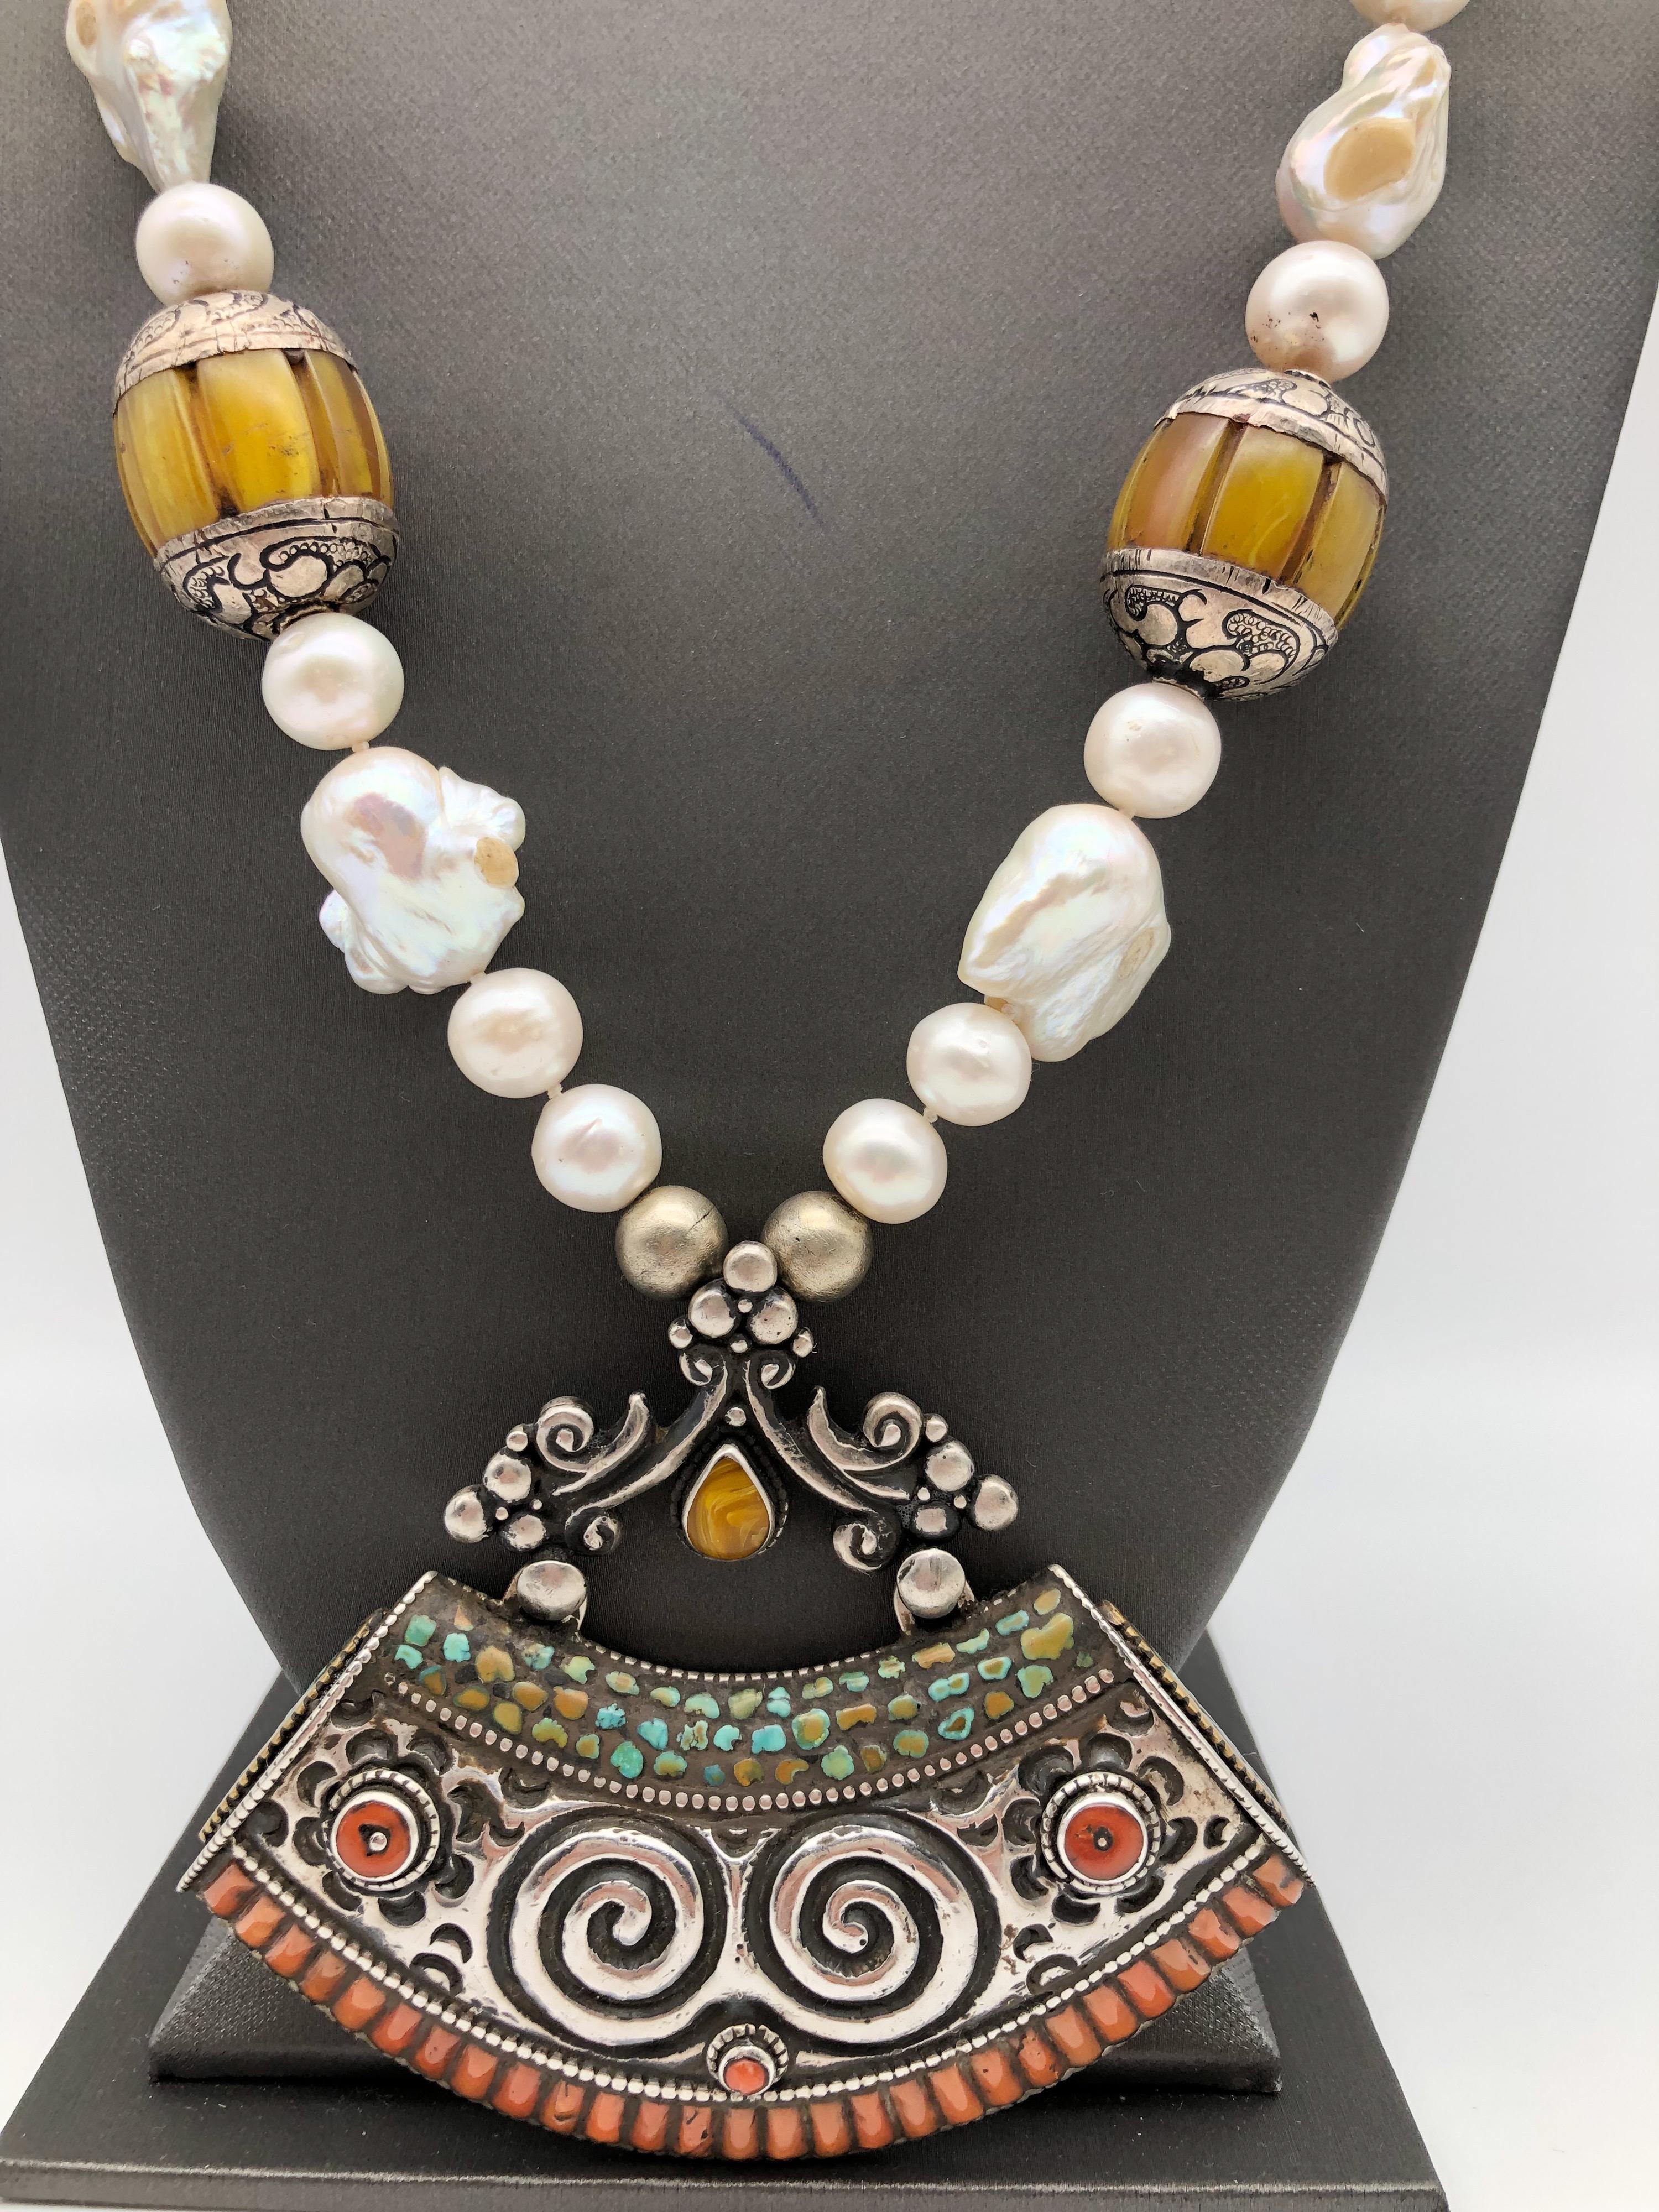 One-of-a-Kind
Ethnic Beads with Tibetan Sterling Silver carved Pendant
Freshwater Pearls 12-14mm, Baroque Pearls, assorted Turquoise, and Tibetan beads.
Sterling Silver pendant size 4' X 2', reverse side of the pendant has detailed 